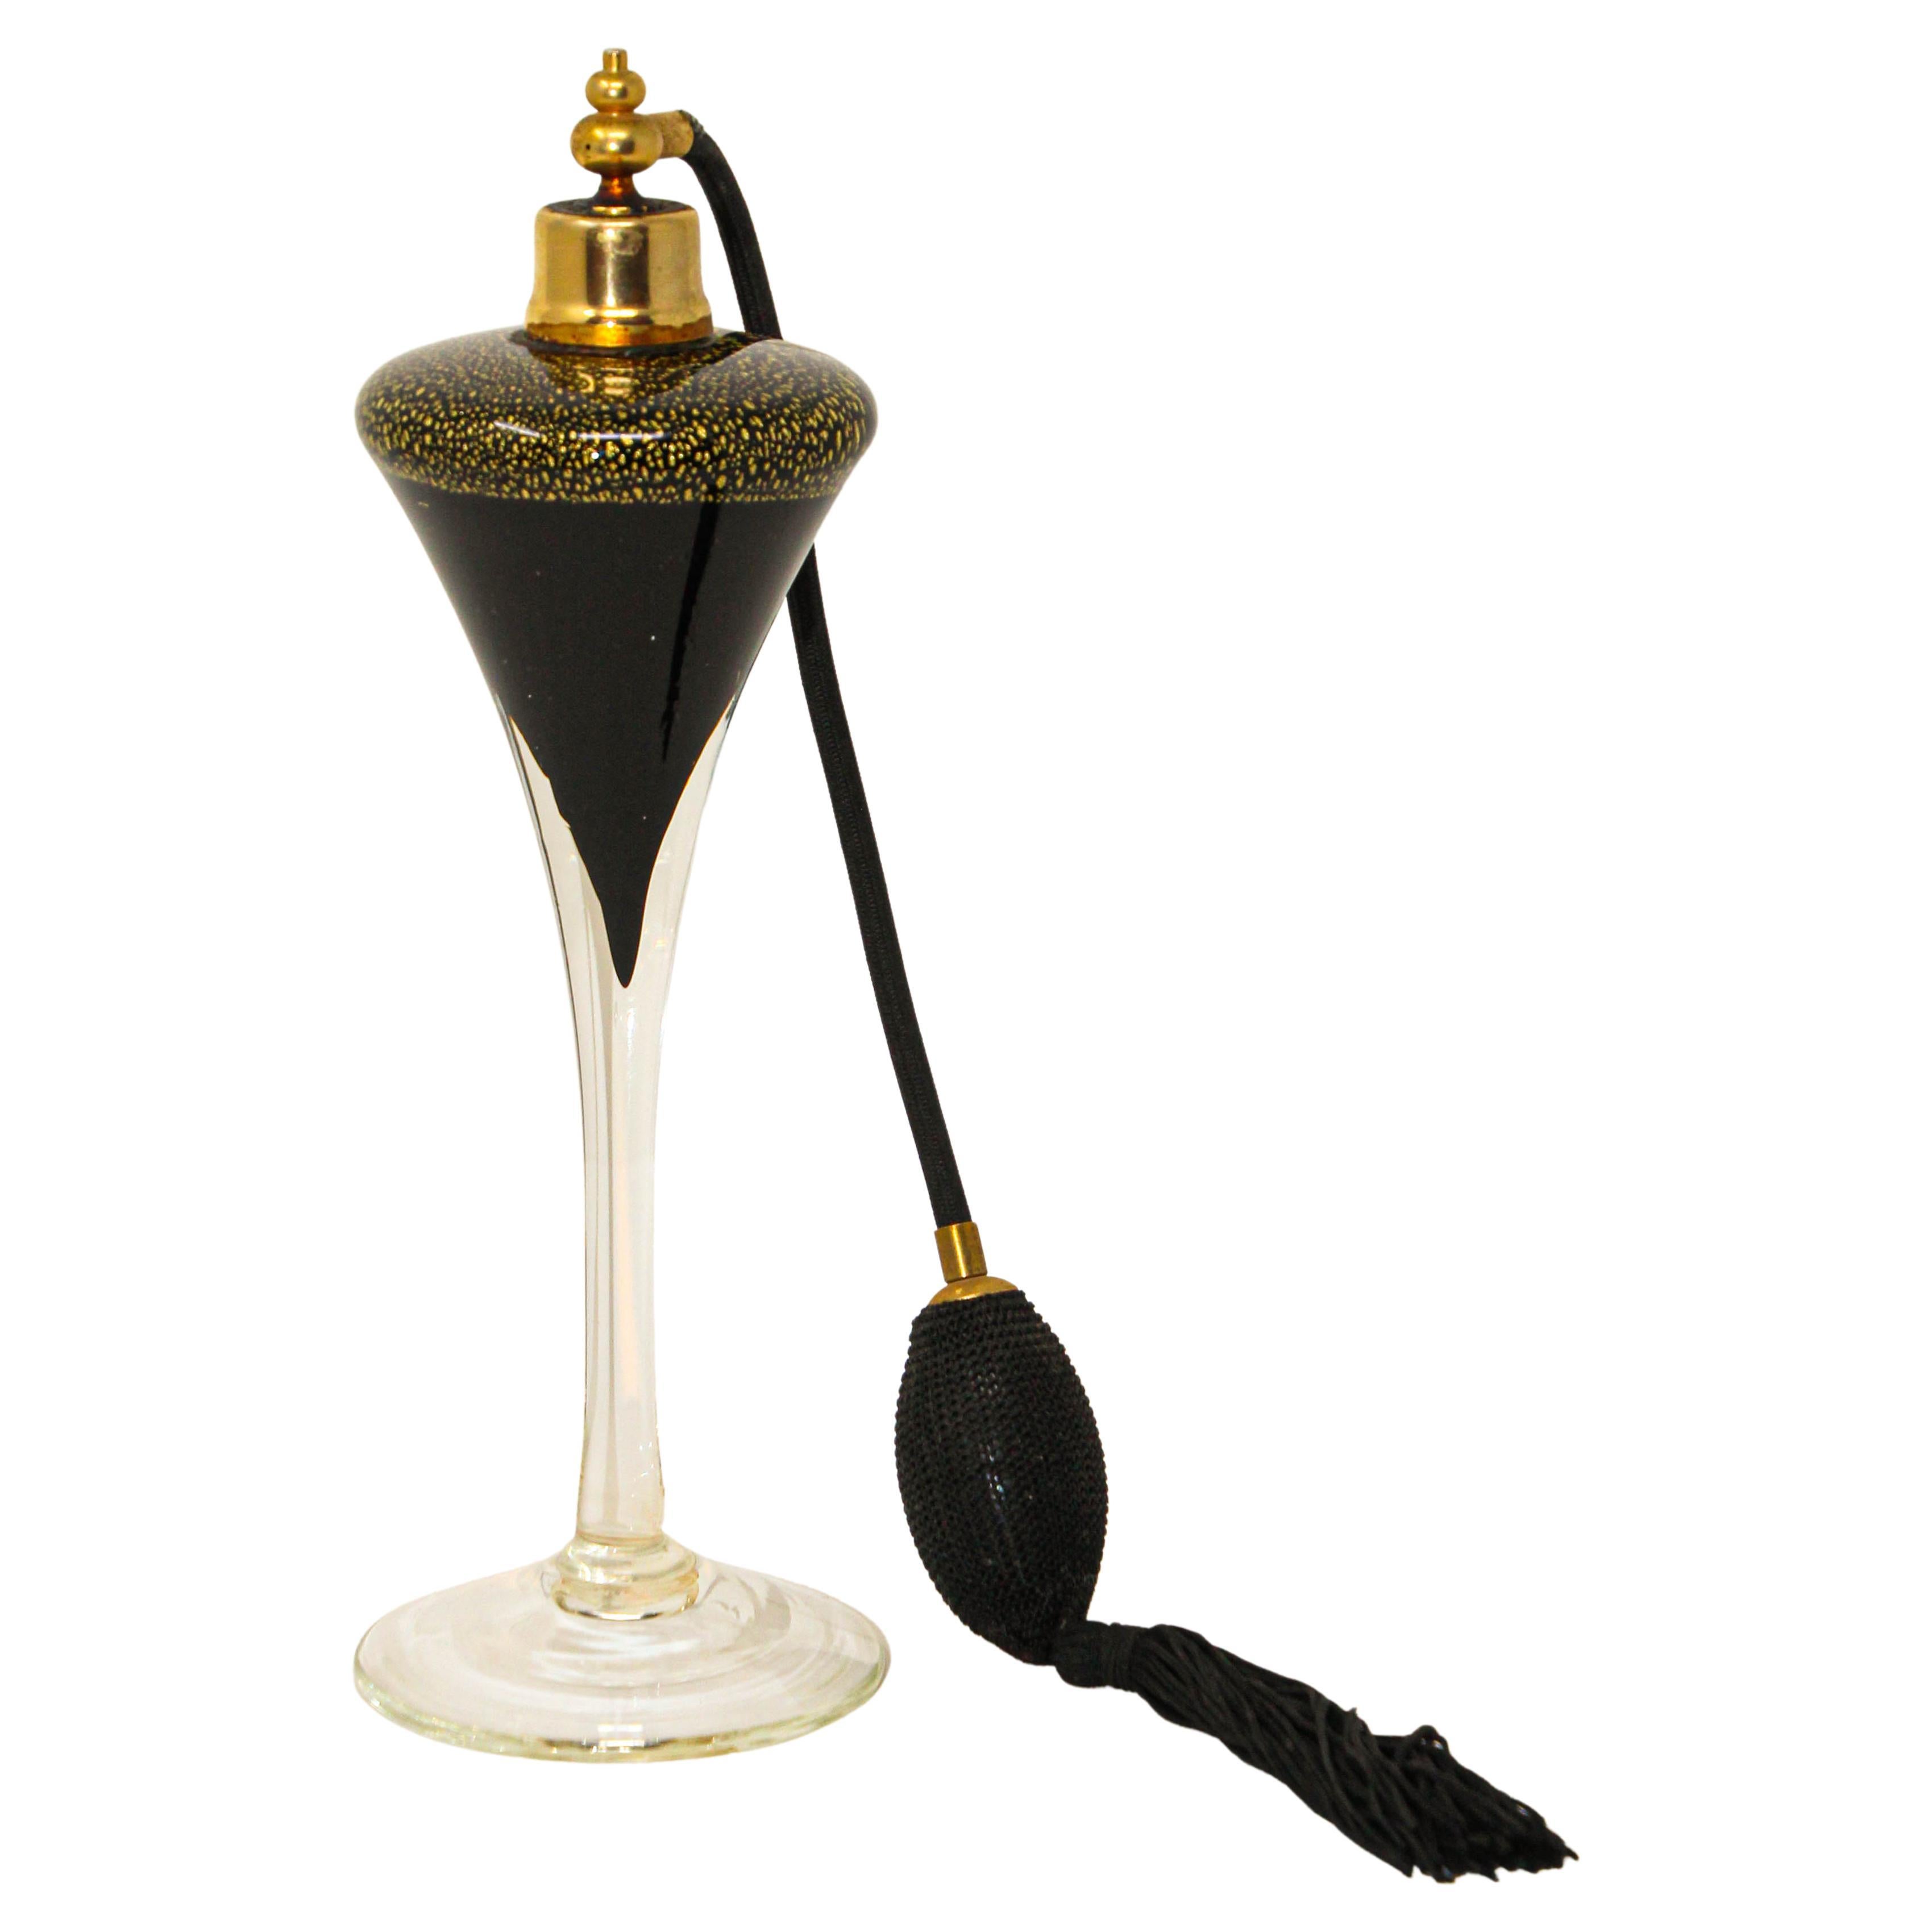 Art Deco Vintage Archimede Seguso Tall Black and Gold Perfume Bottle 1960's